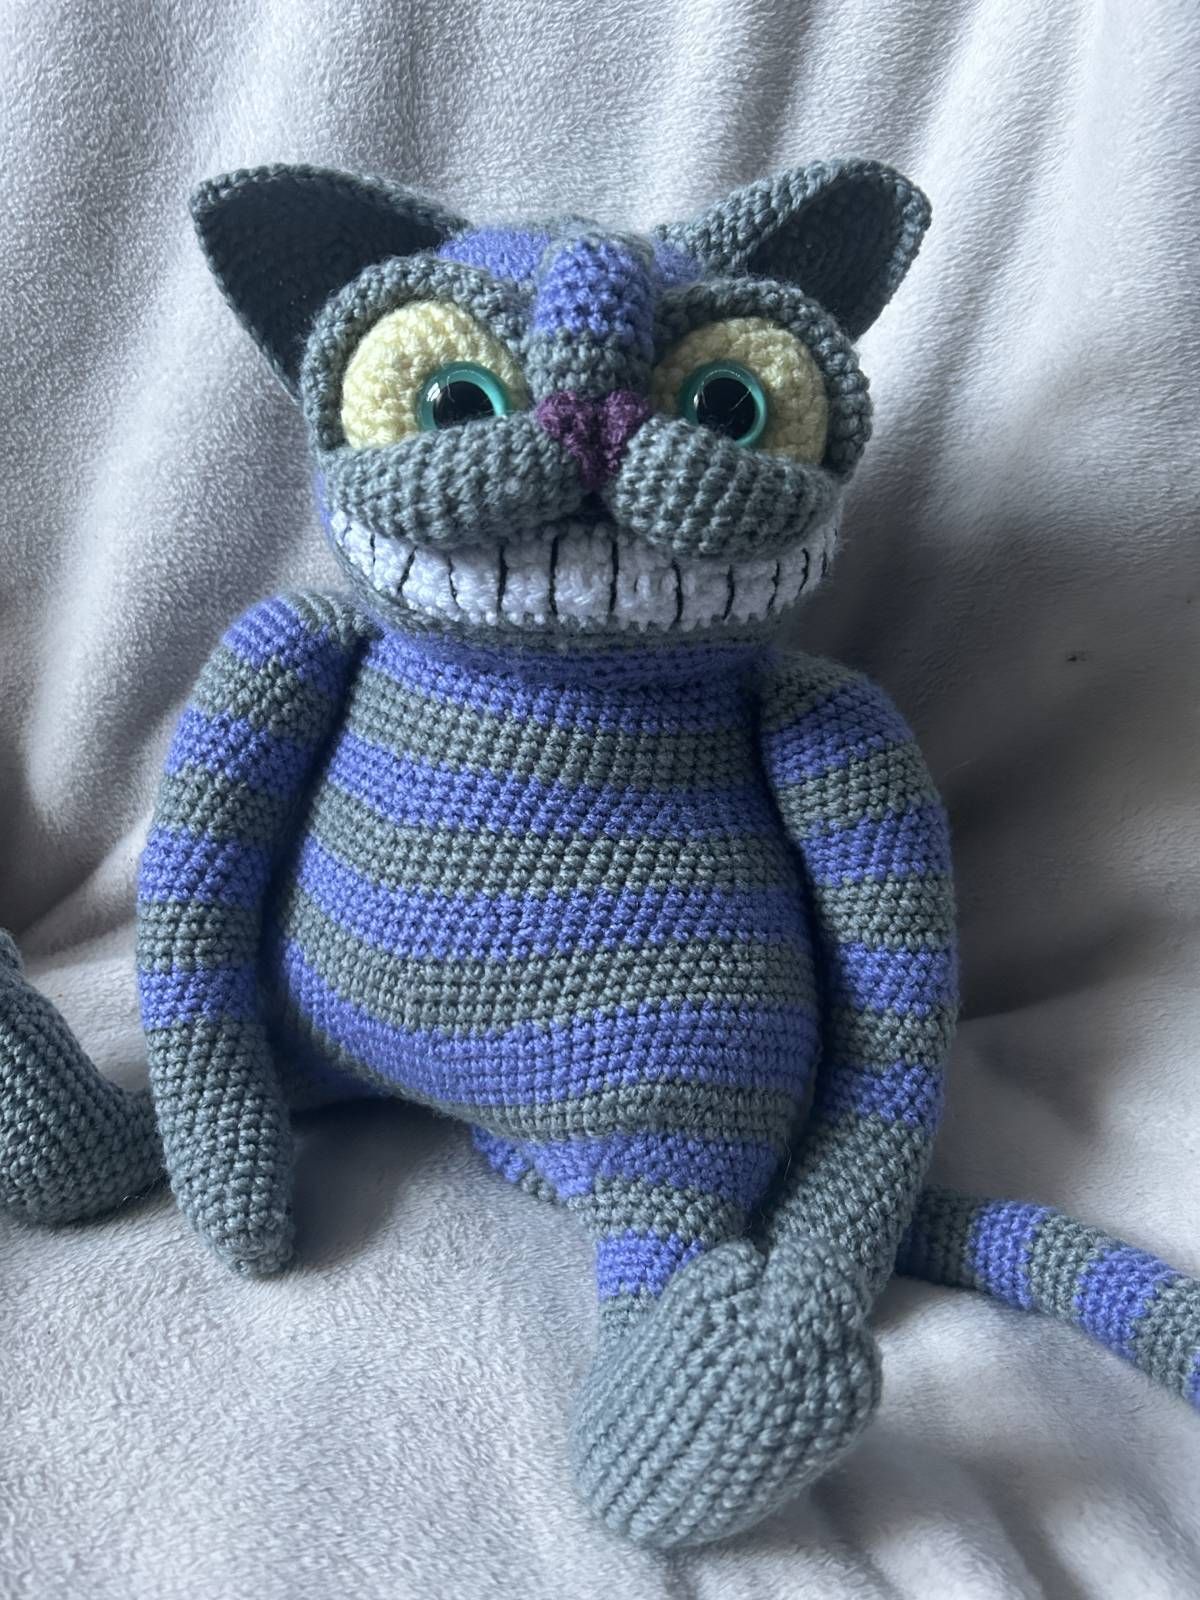 Cheshire cat doll photo review